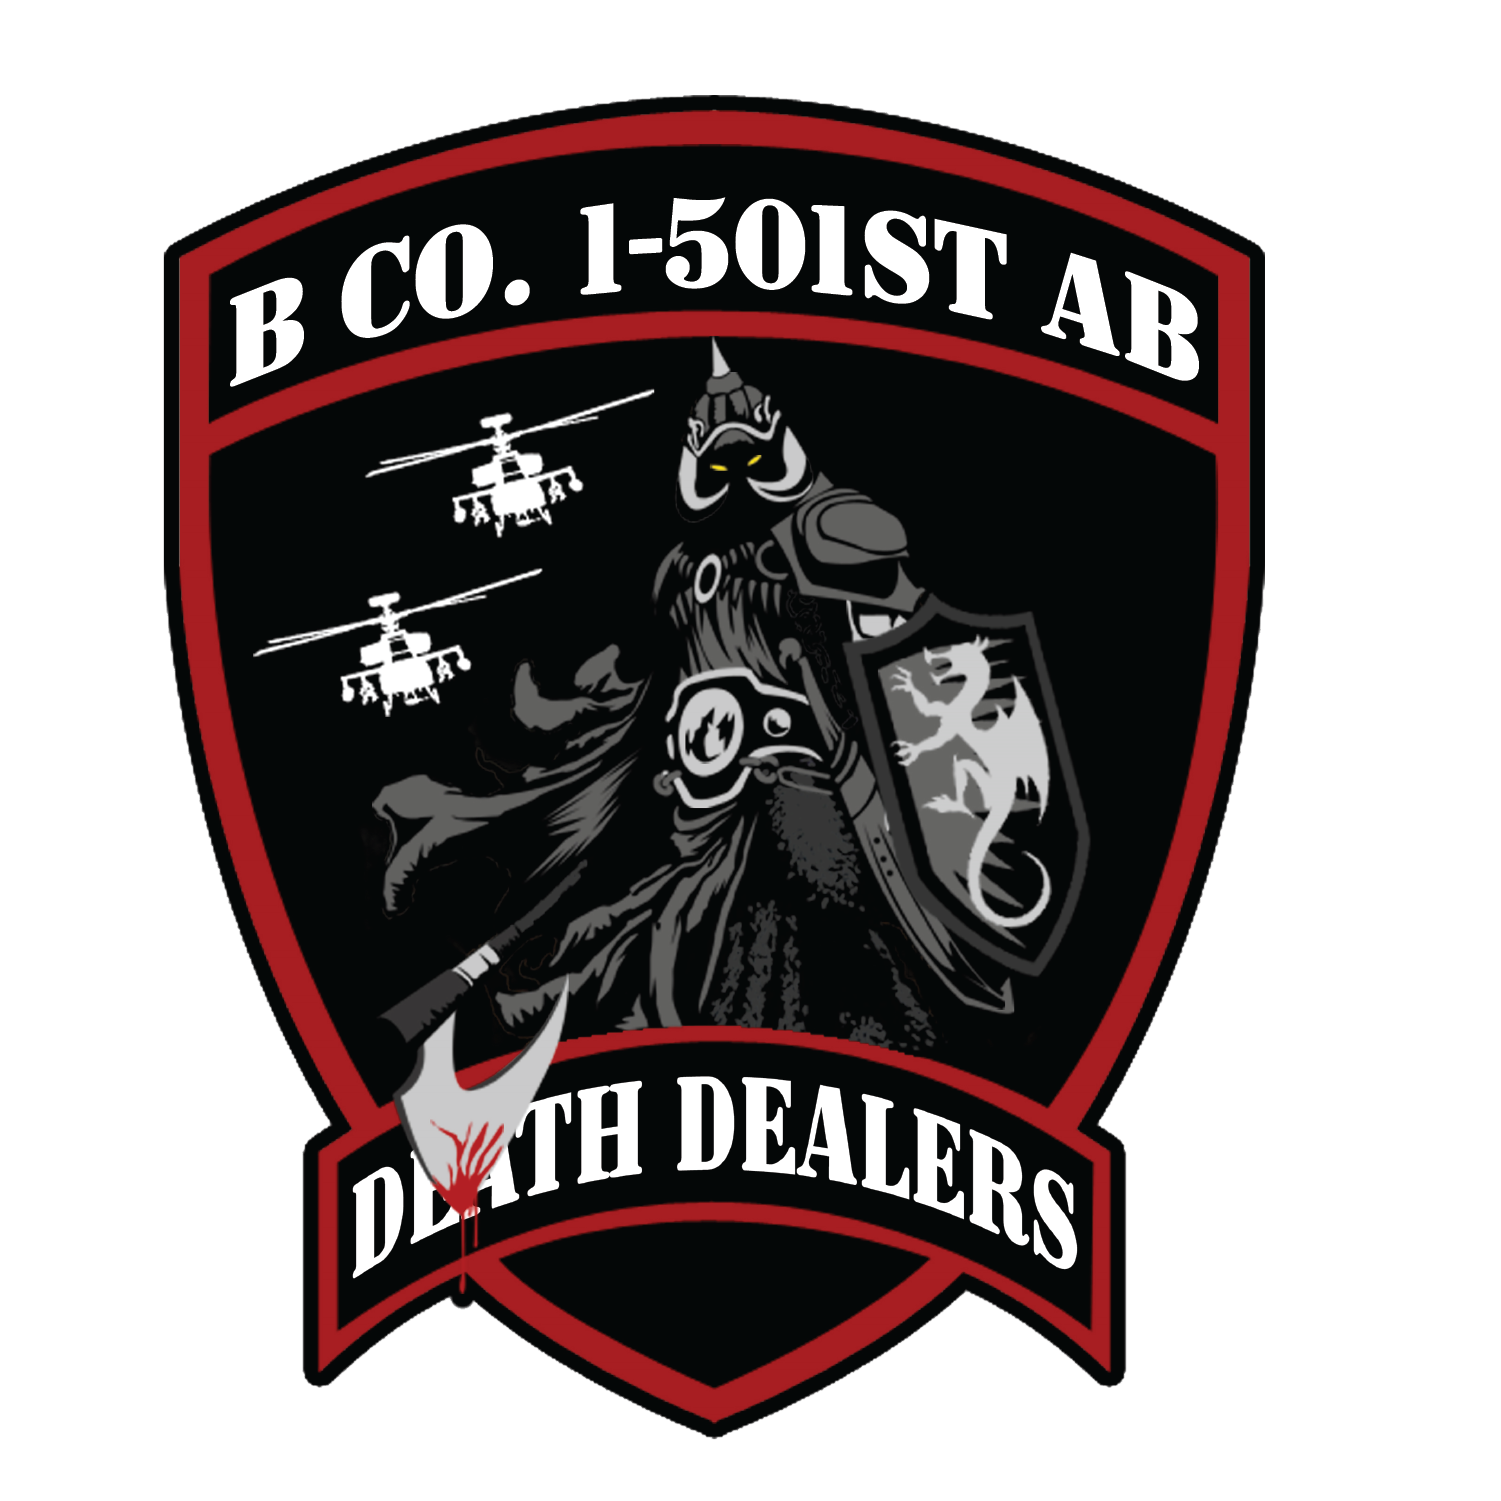 B Co, 1-501 AB "Death Dealers"